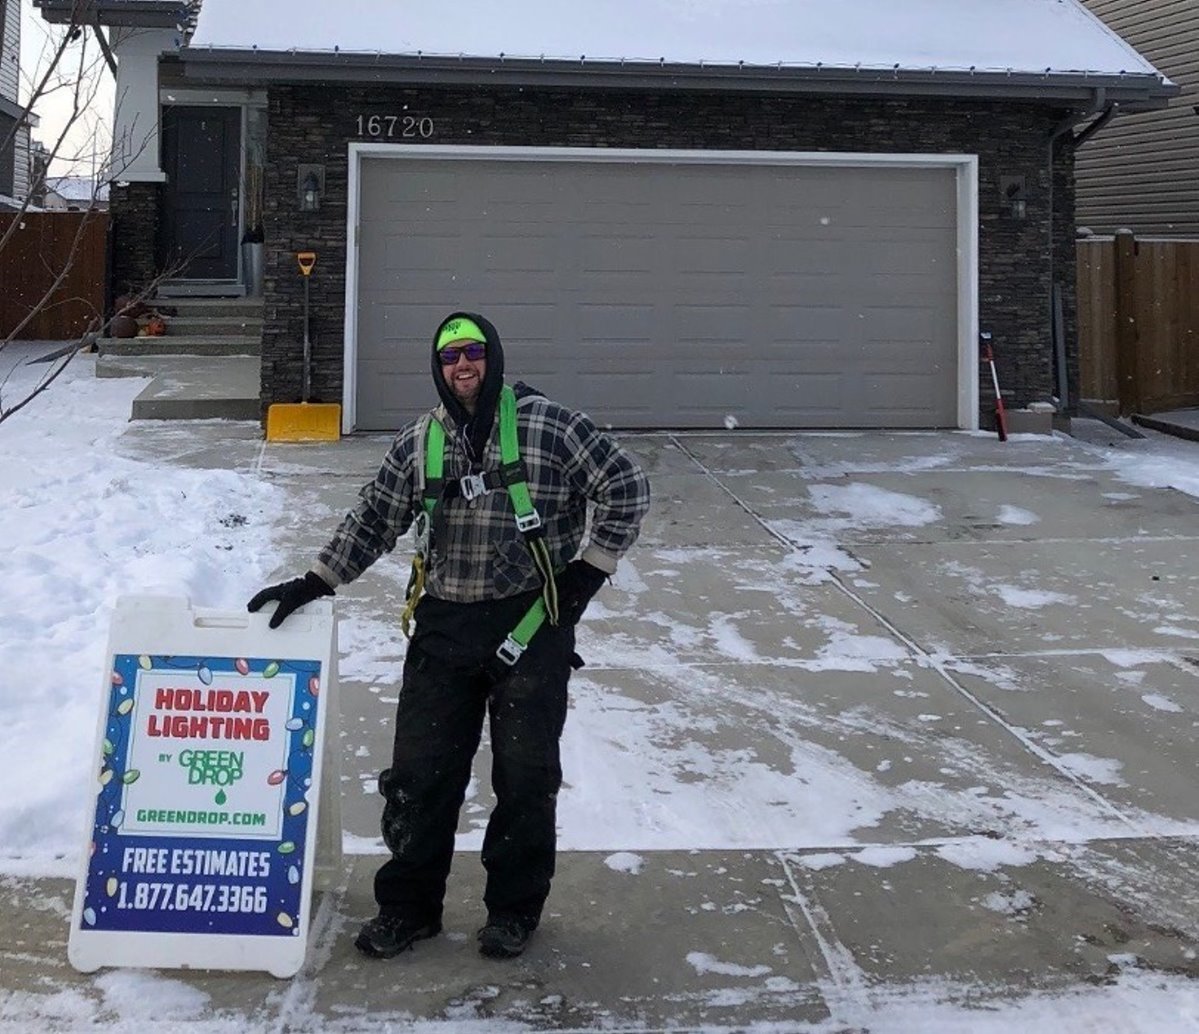 A Green Drop employee standing in front of a house with a sign for holiday lighting